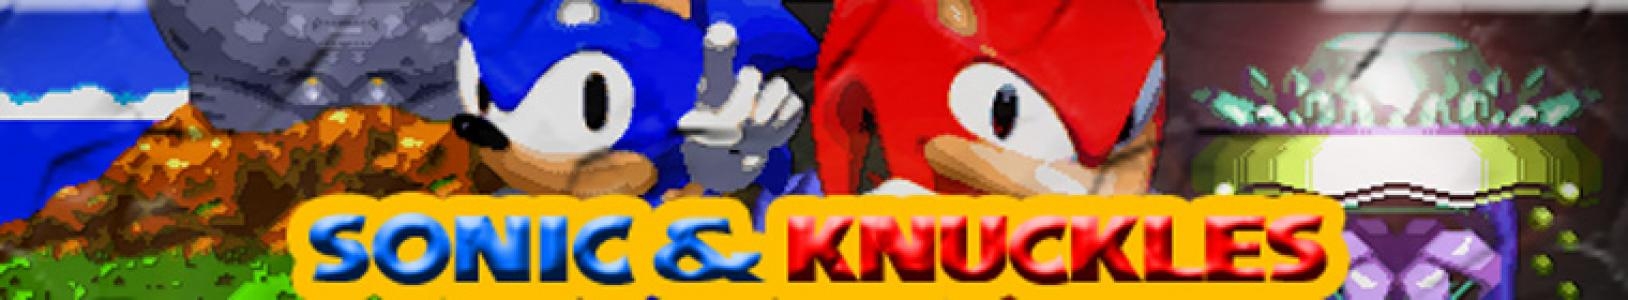 Sonic & Knuckles banner